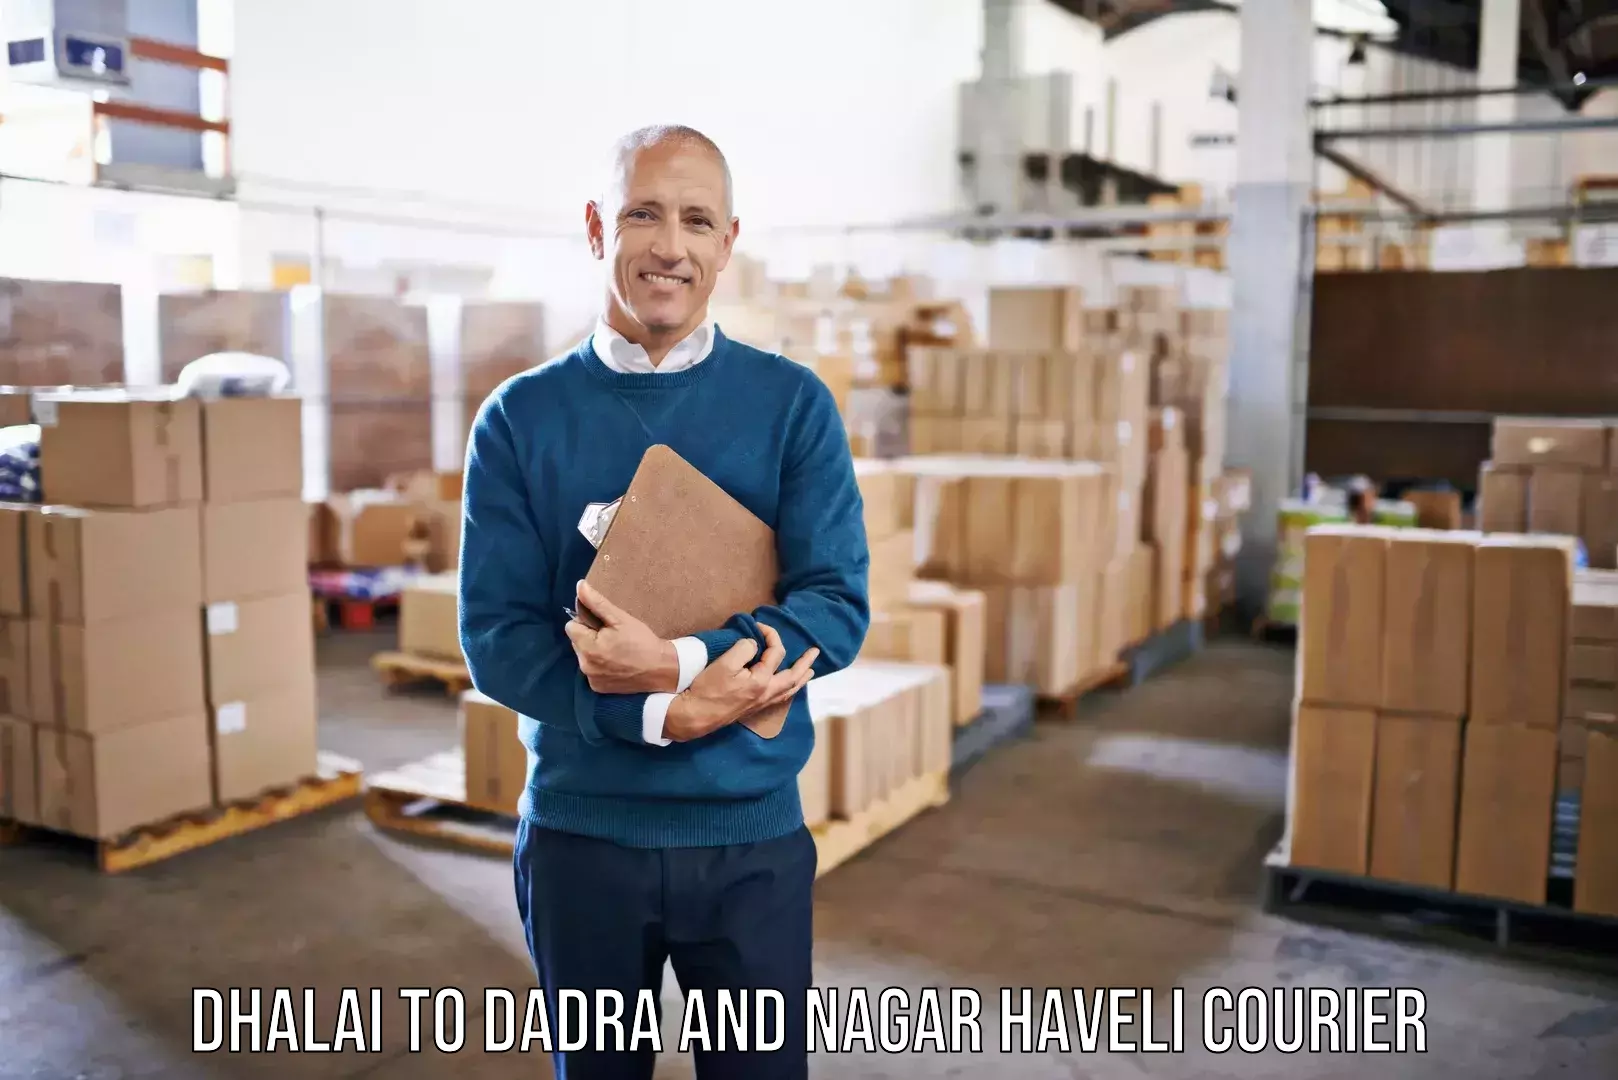 Furniture transport specialists Dhalai to Dadra and Nagar Haveli